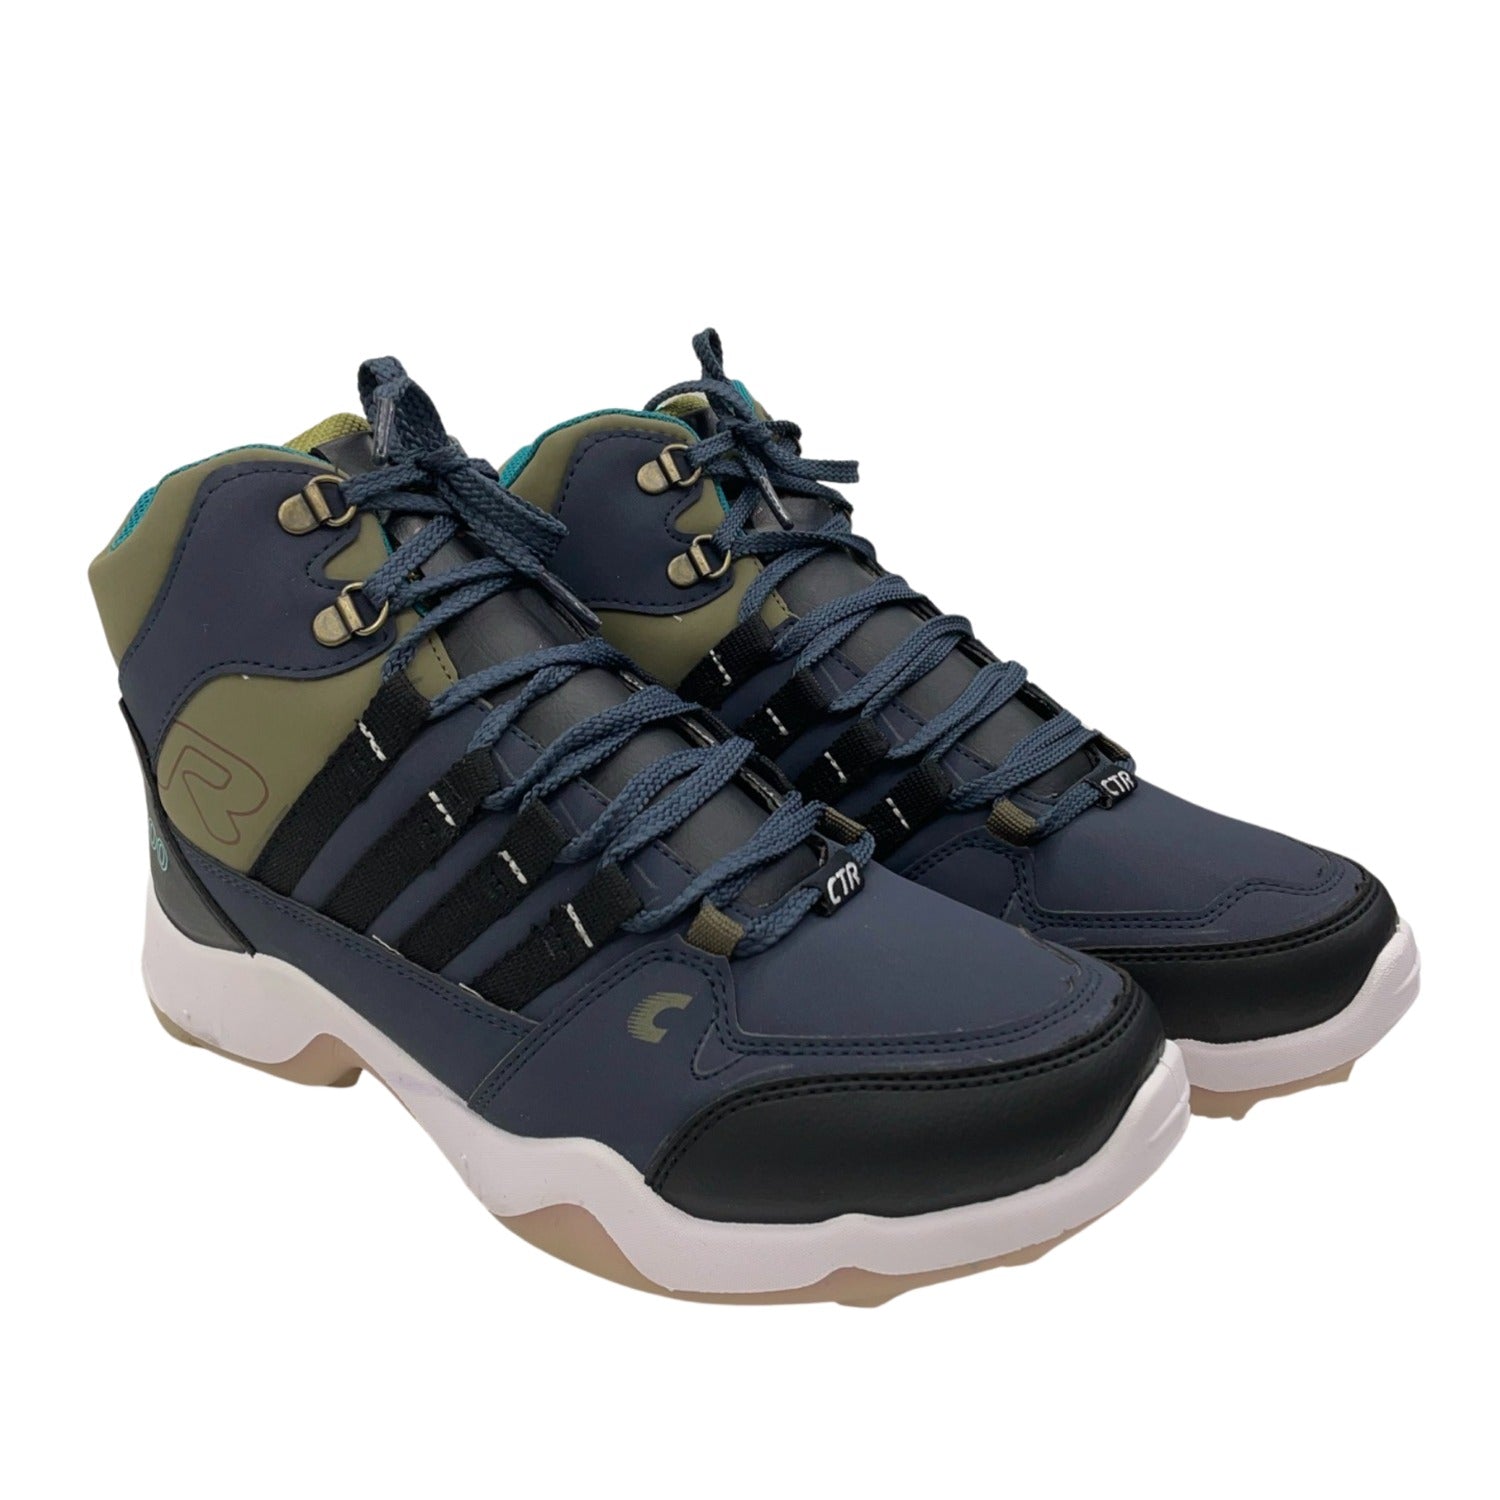 Buy Gokyo Trekking Shoes - Mid Ankle Blue / Brown Blue Khaki | Trekking & Hiking Shoes at Gokyo Outdoor Clothing & Gear